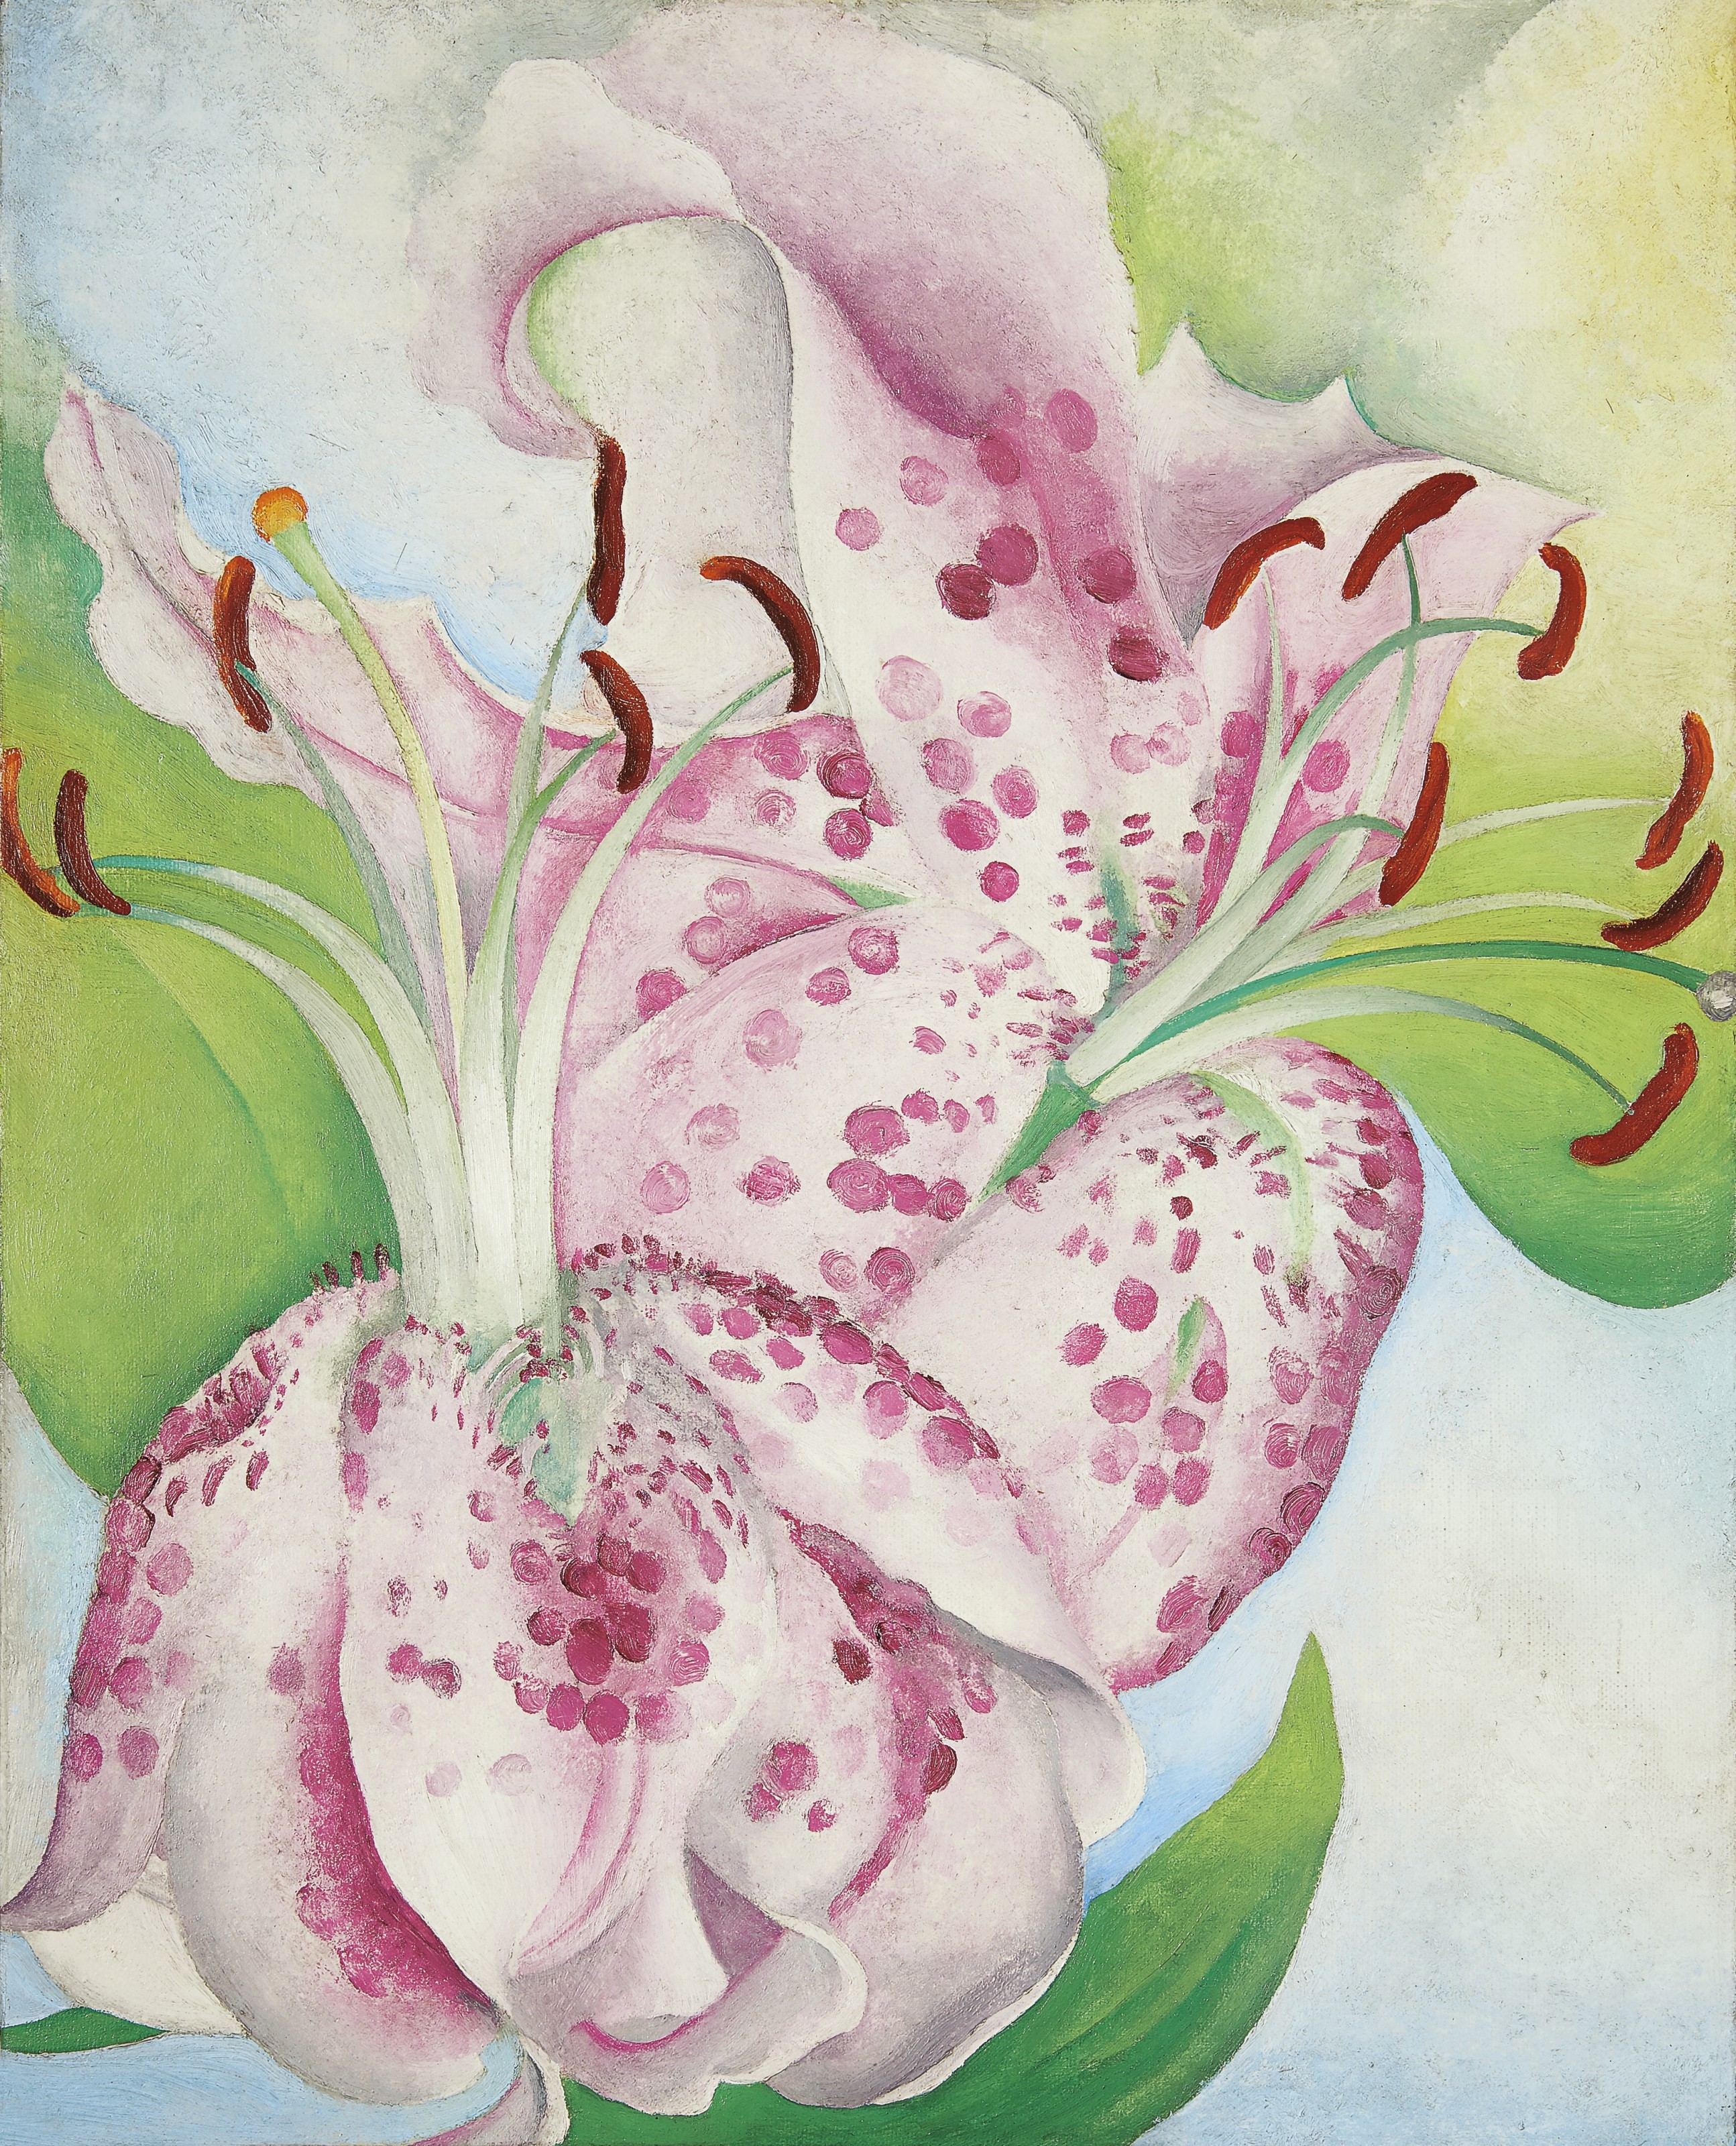 Pink Spotted Lillies by Georgia O'Keeffe, 1936, Painted in 1936